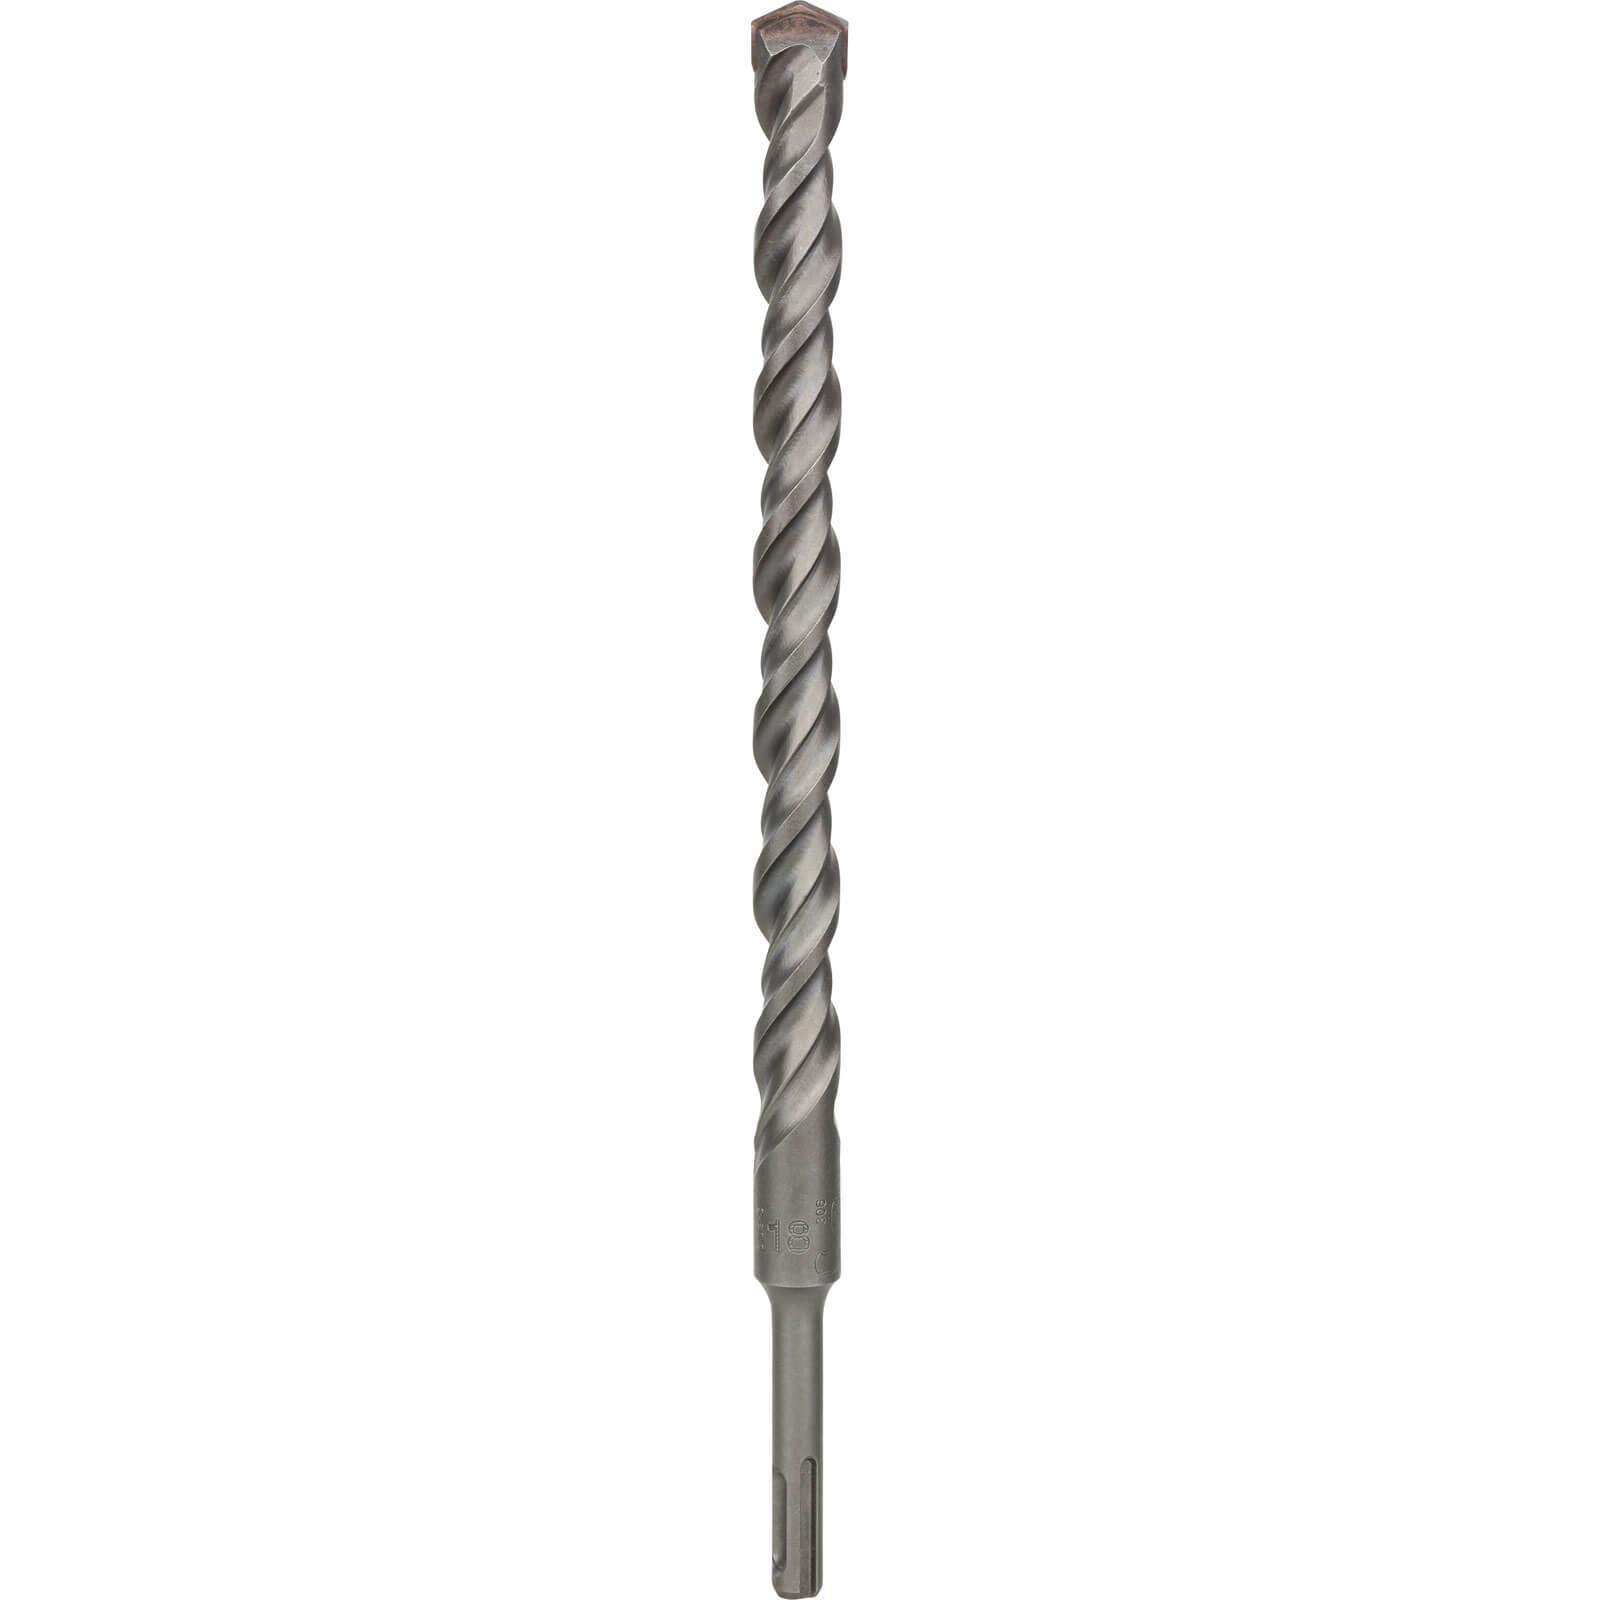 Image of Bosch Series 3 SDS Plus Masonry Drill Bit 18mm 300mm Pack of 1